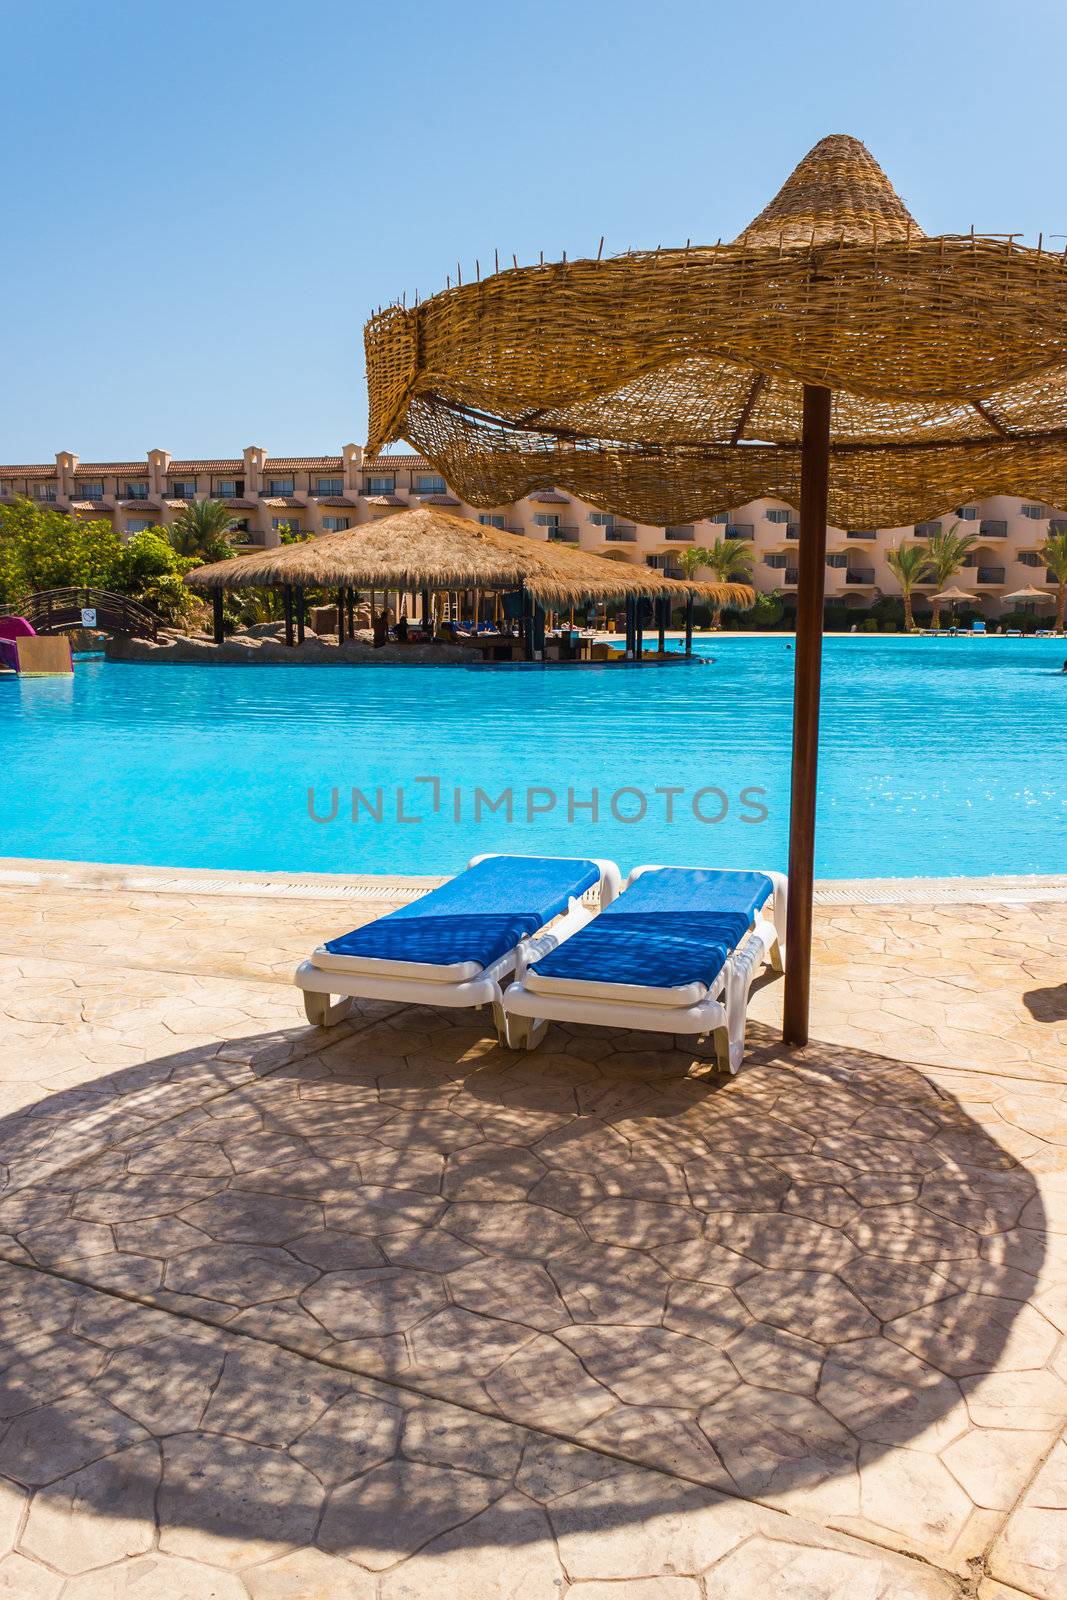  the pool, beach umbrellas and the Red Sea in Egypt  by oleg_zhukov